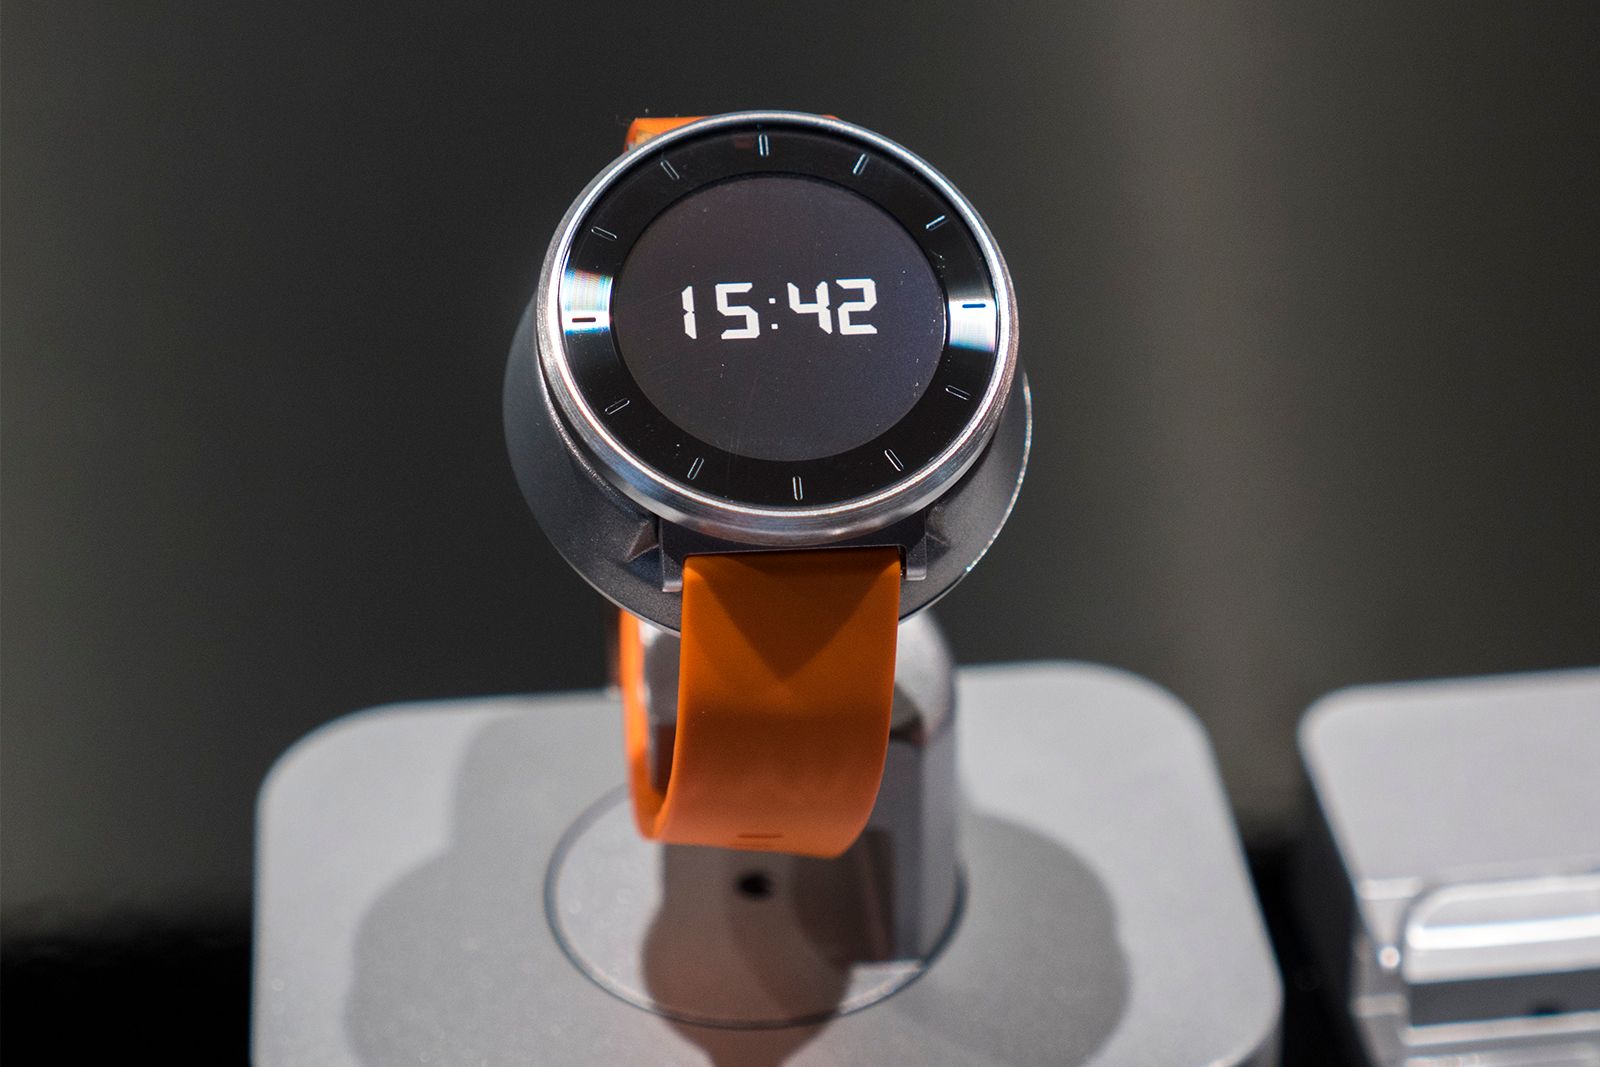 huawei fit delivers heart rate monitor in a watch style fitness tracker image 1